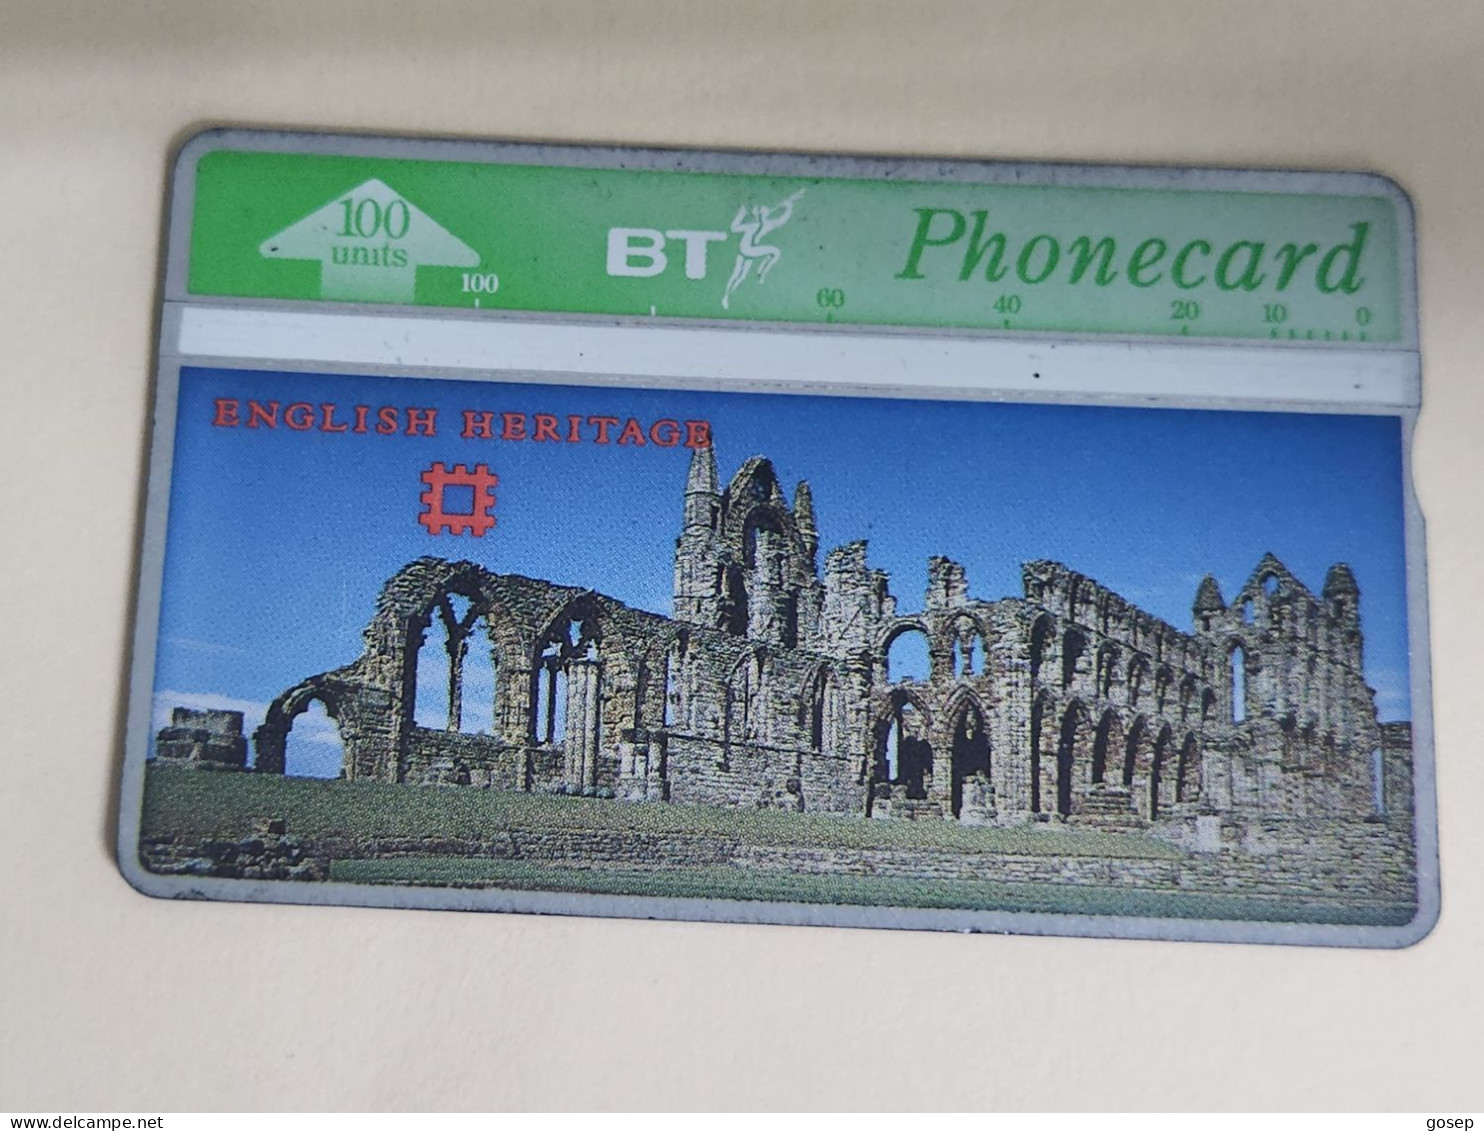 United Kingdom-(BTA122)-HERITAGE-Whitby Abbey-(217)(100units)(527H30198)price Cataloge3.00£-used+1card Prepiad Free - BT Publicitaire Uitgaven